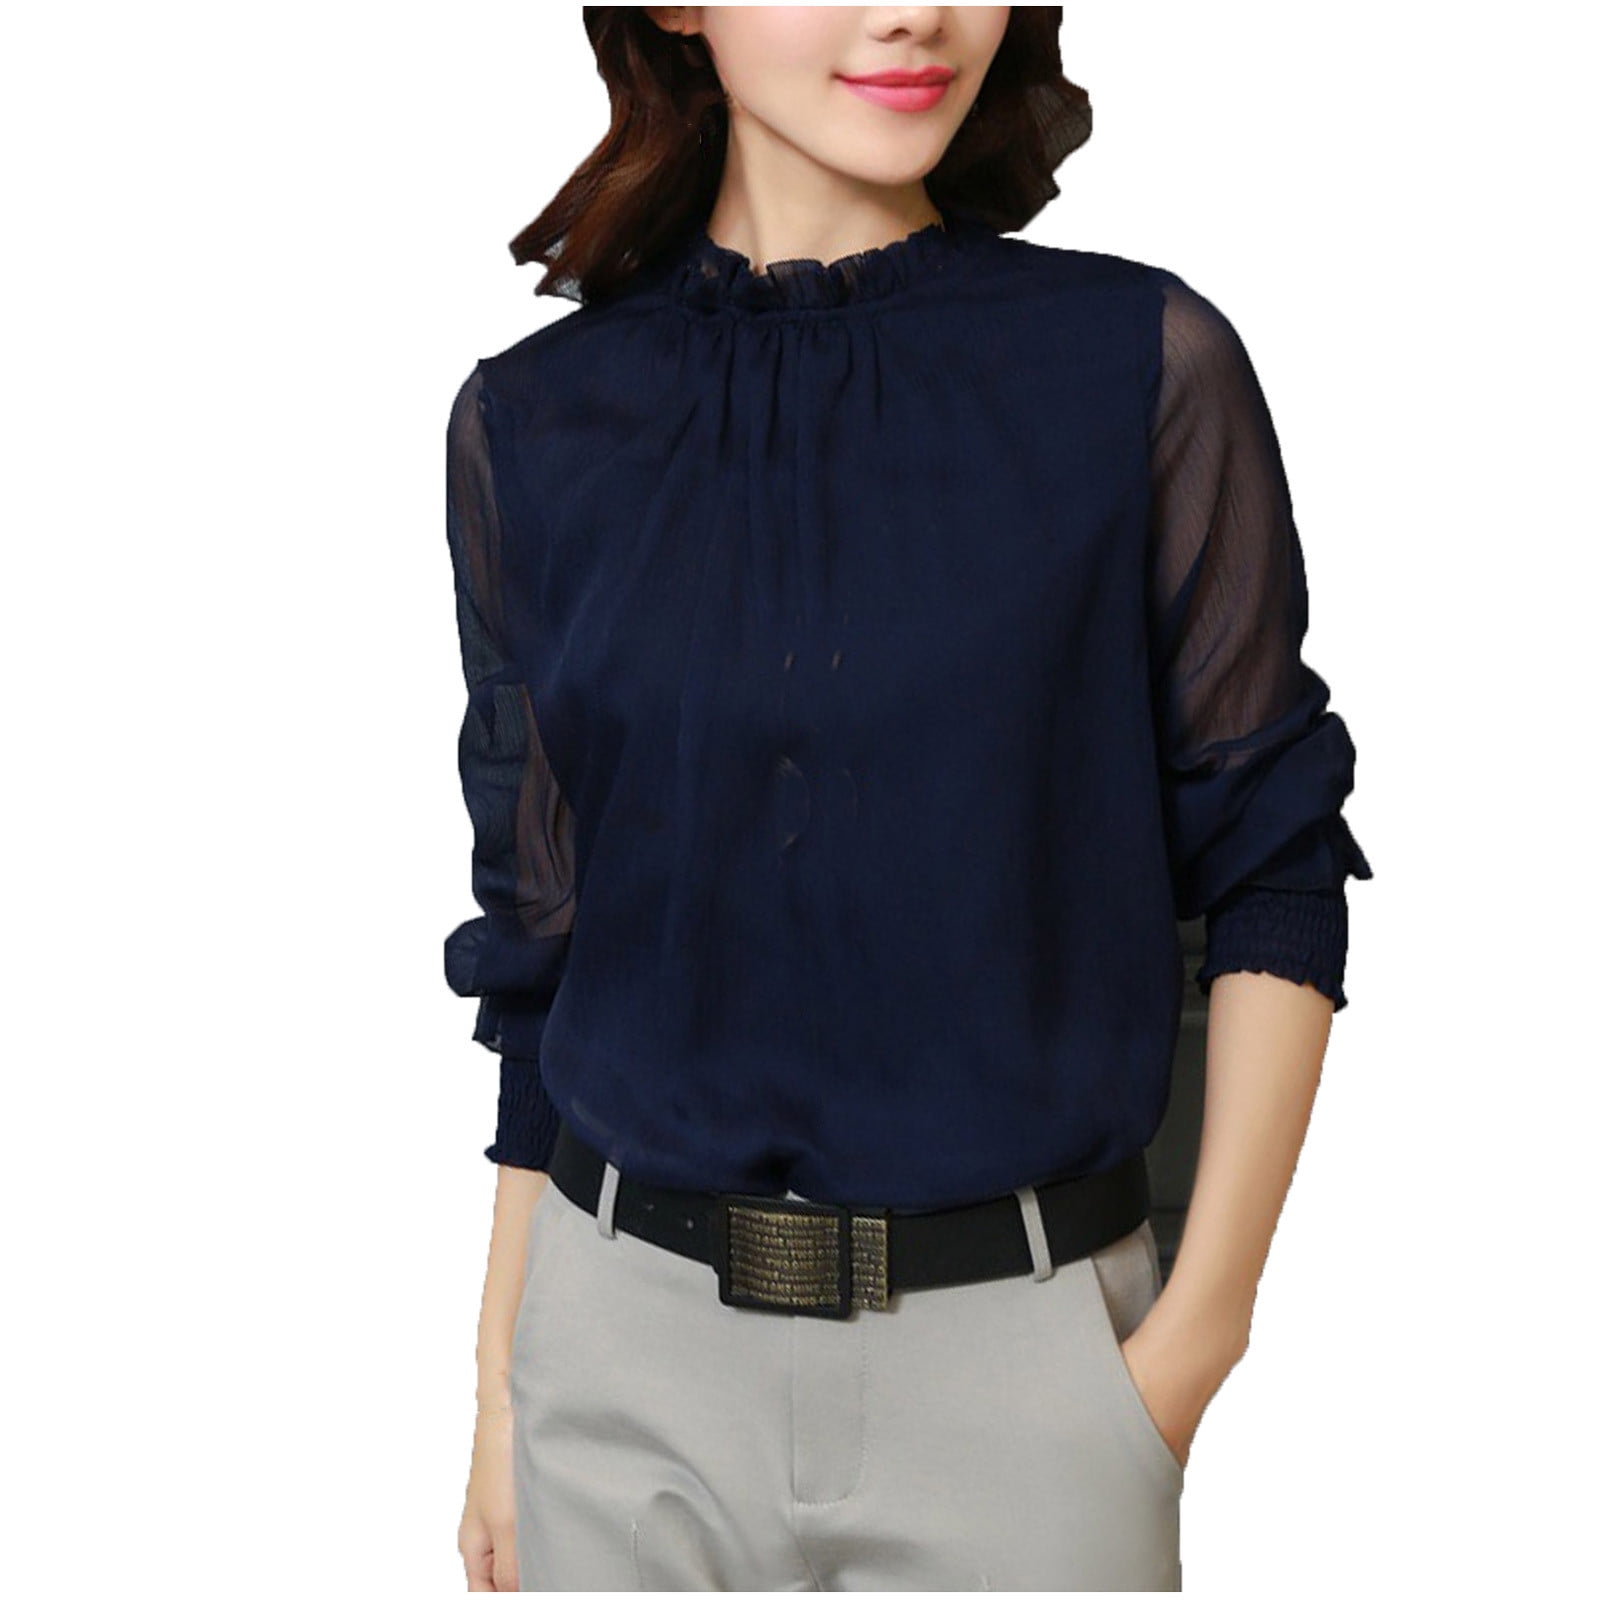 Casual Wear Plain Chiffon Top And Blouse Shirts Styles For Work